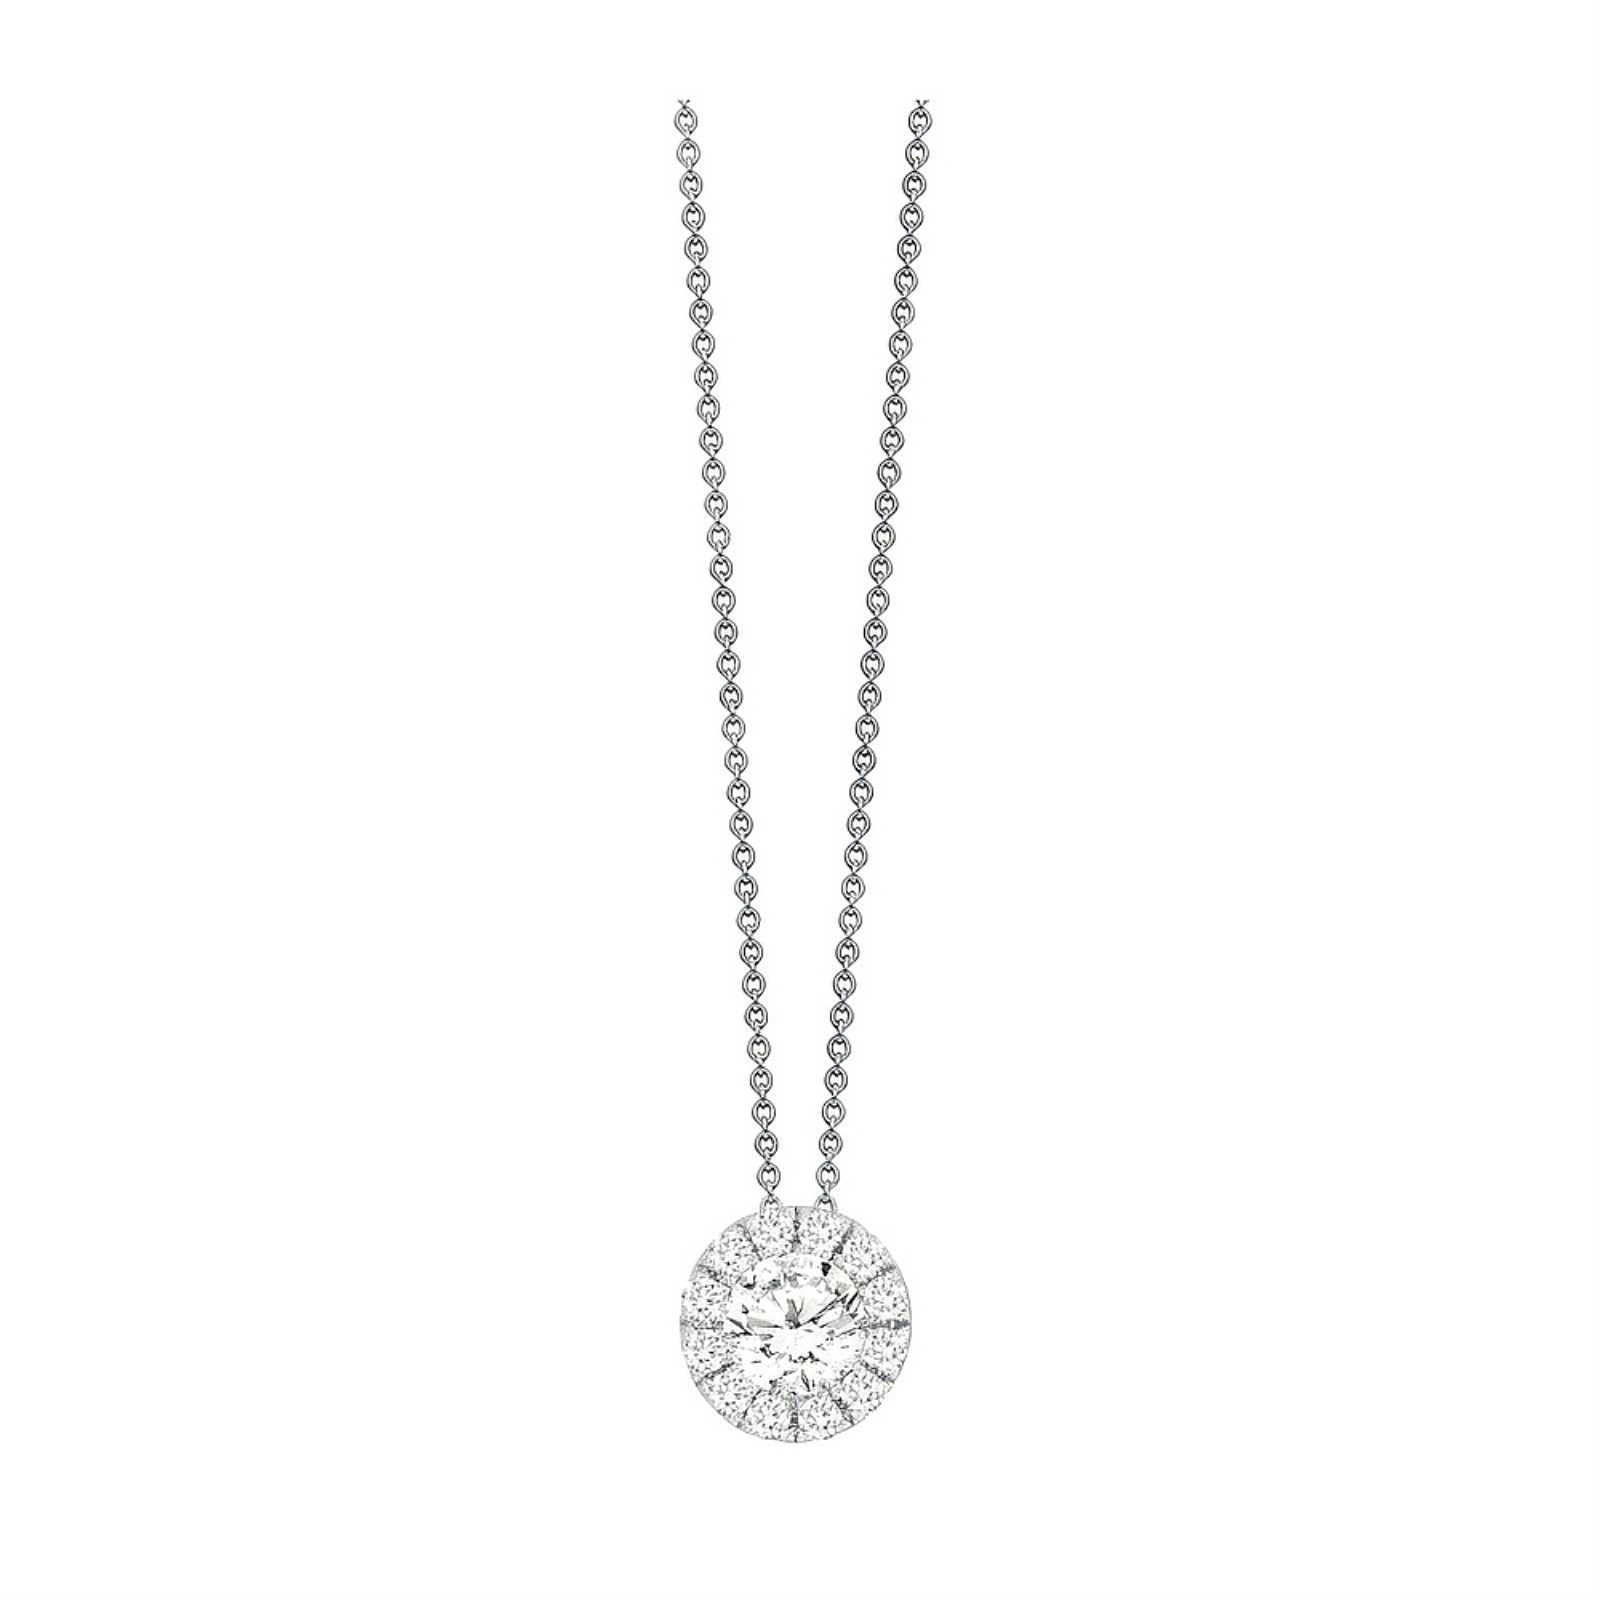 White Gold and Diamond Halo Necklace